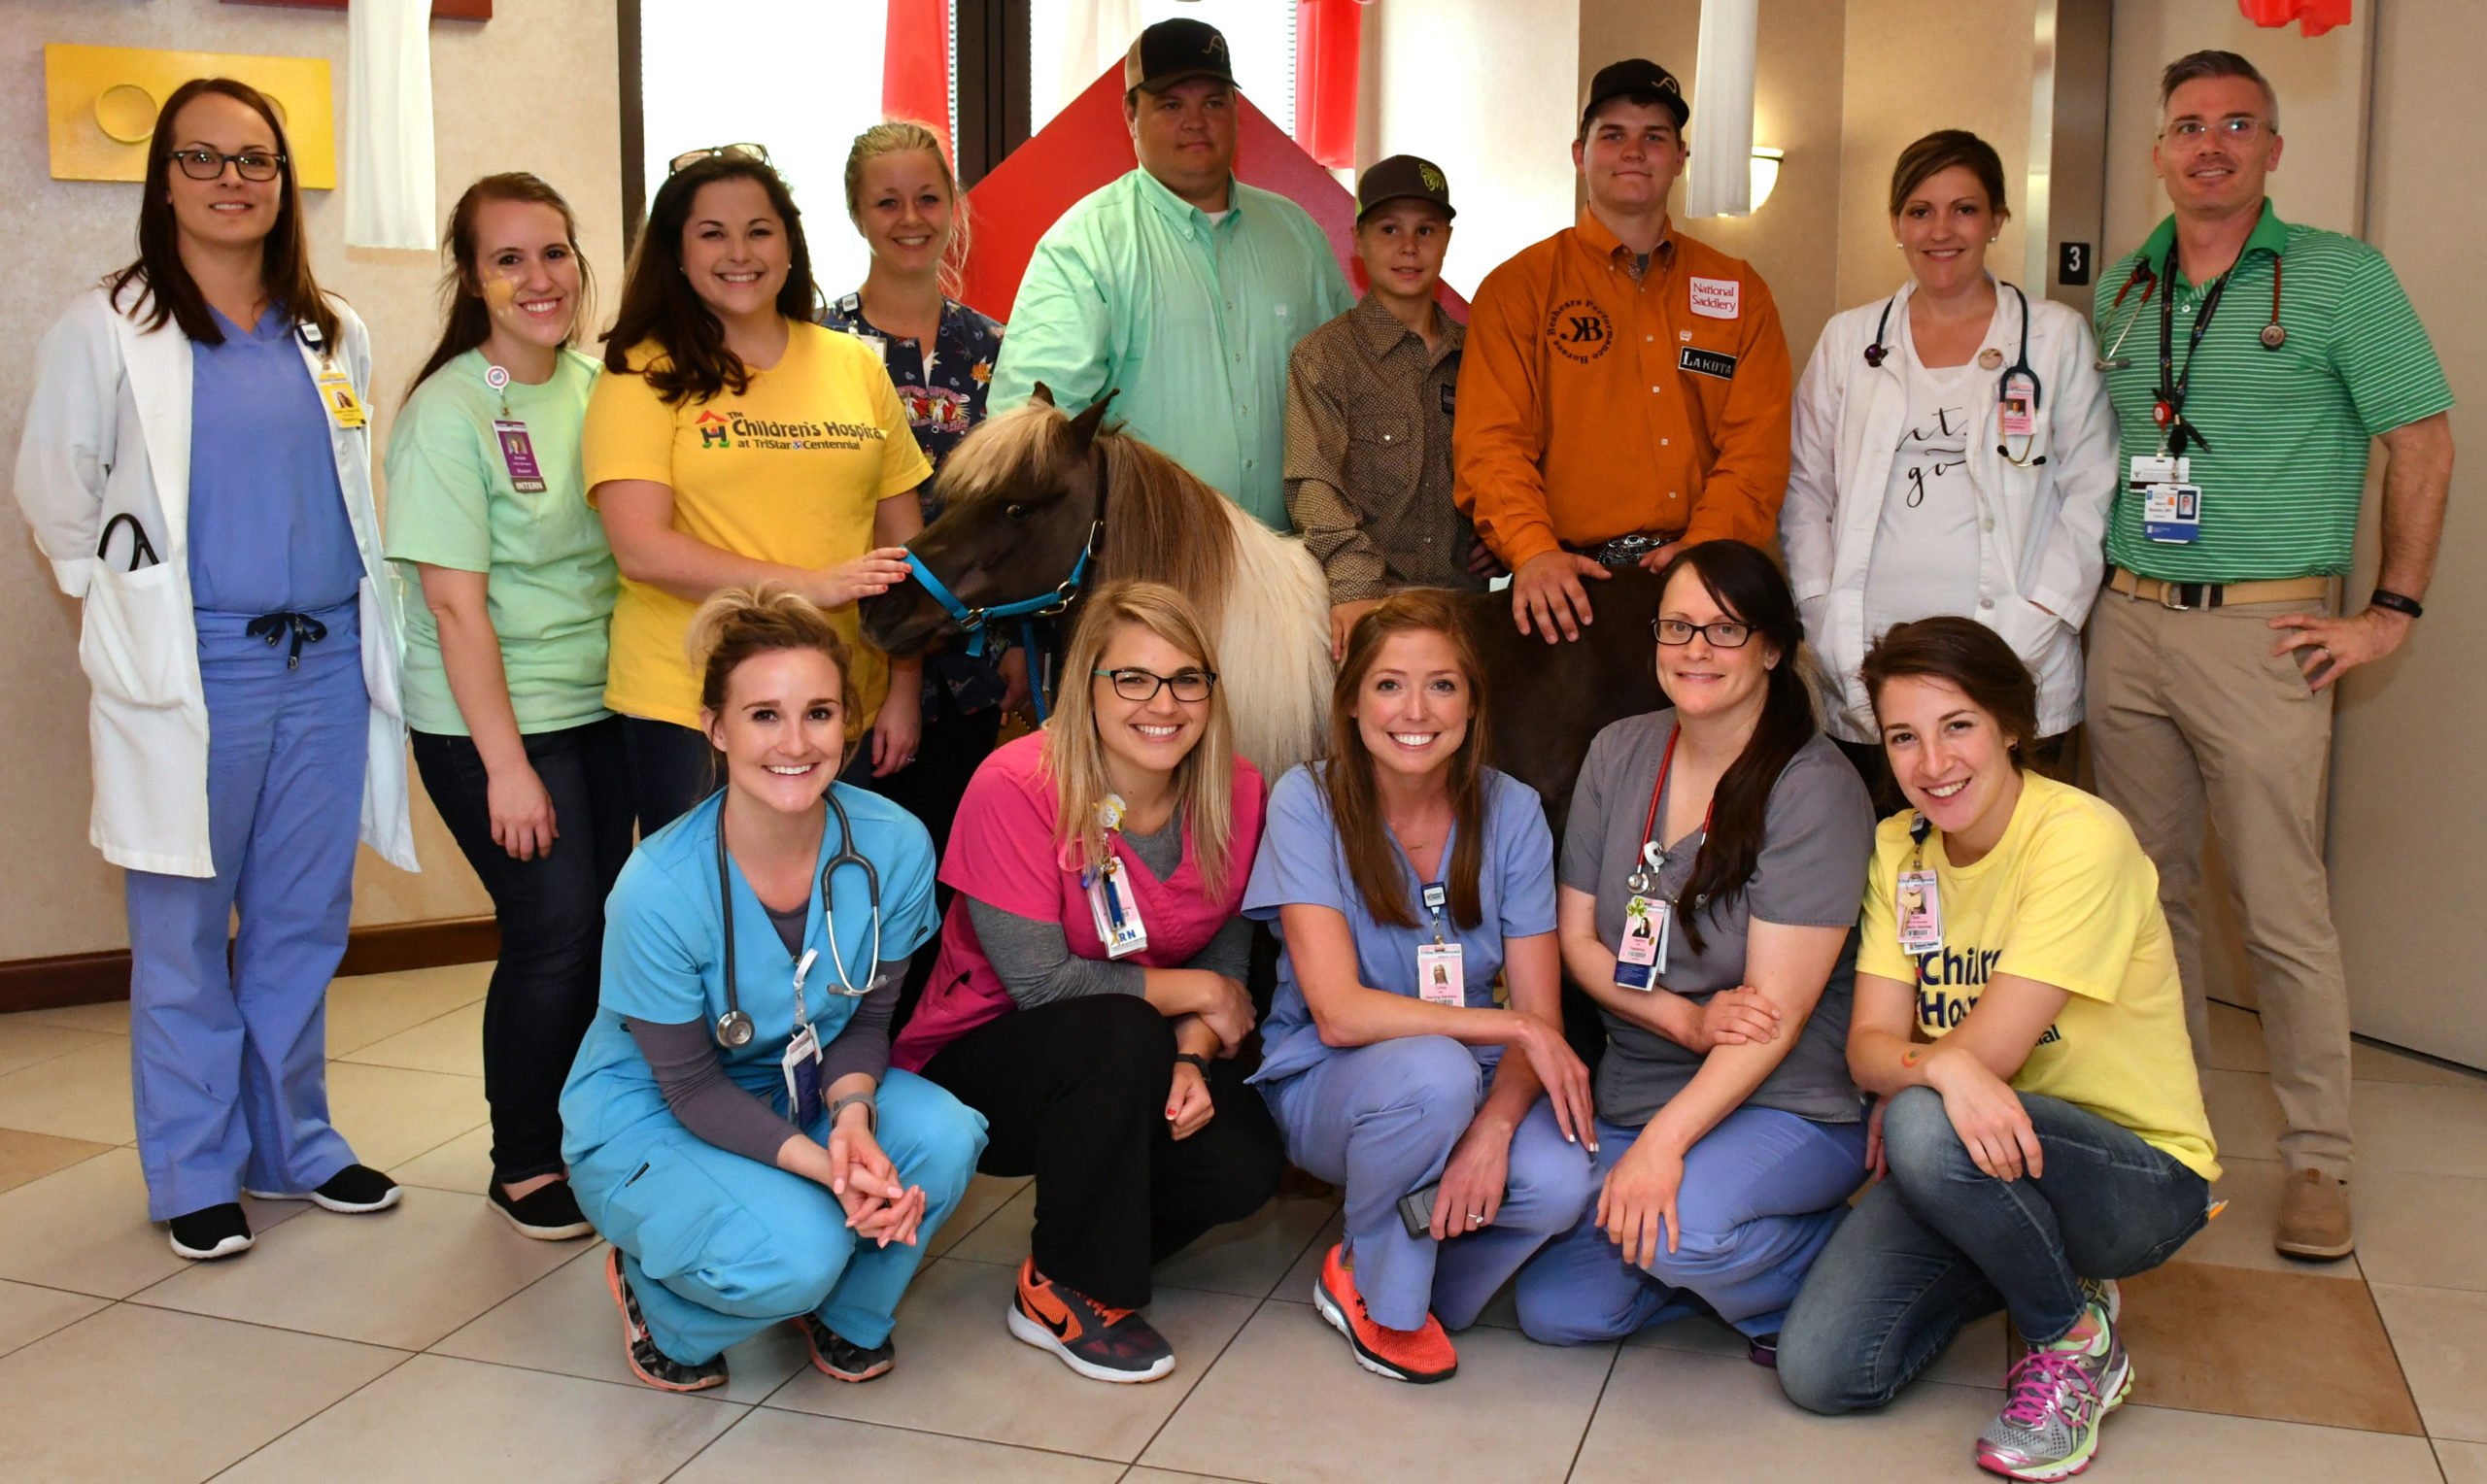 Group of hospital caregivers posing with a pony